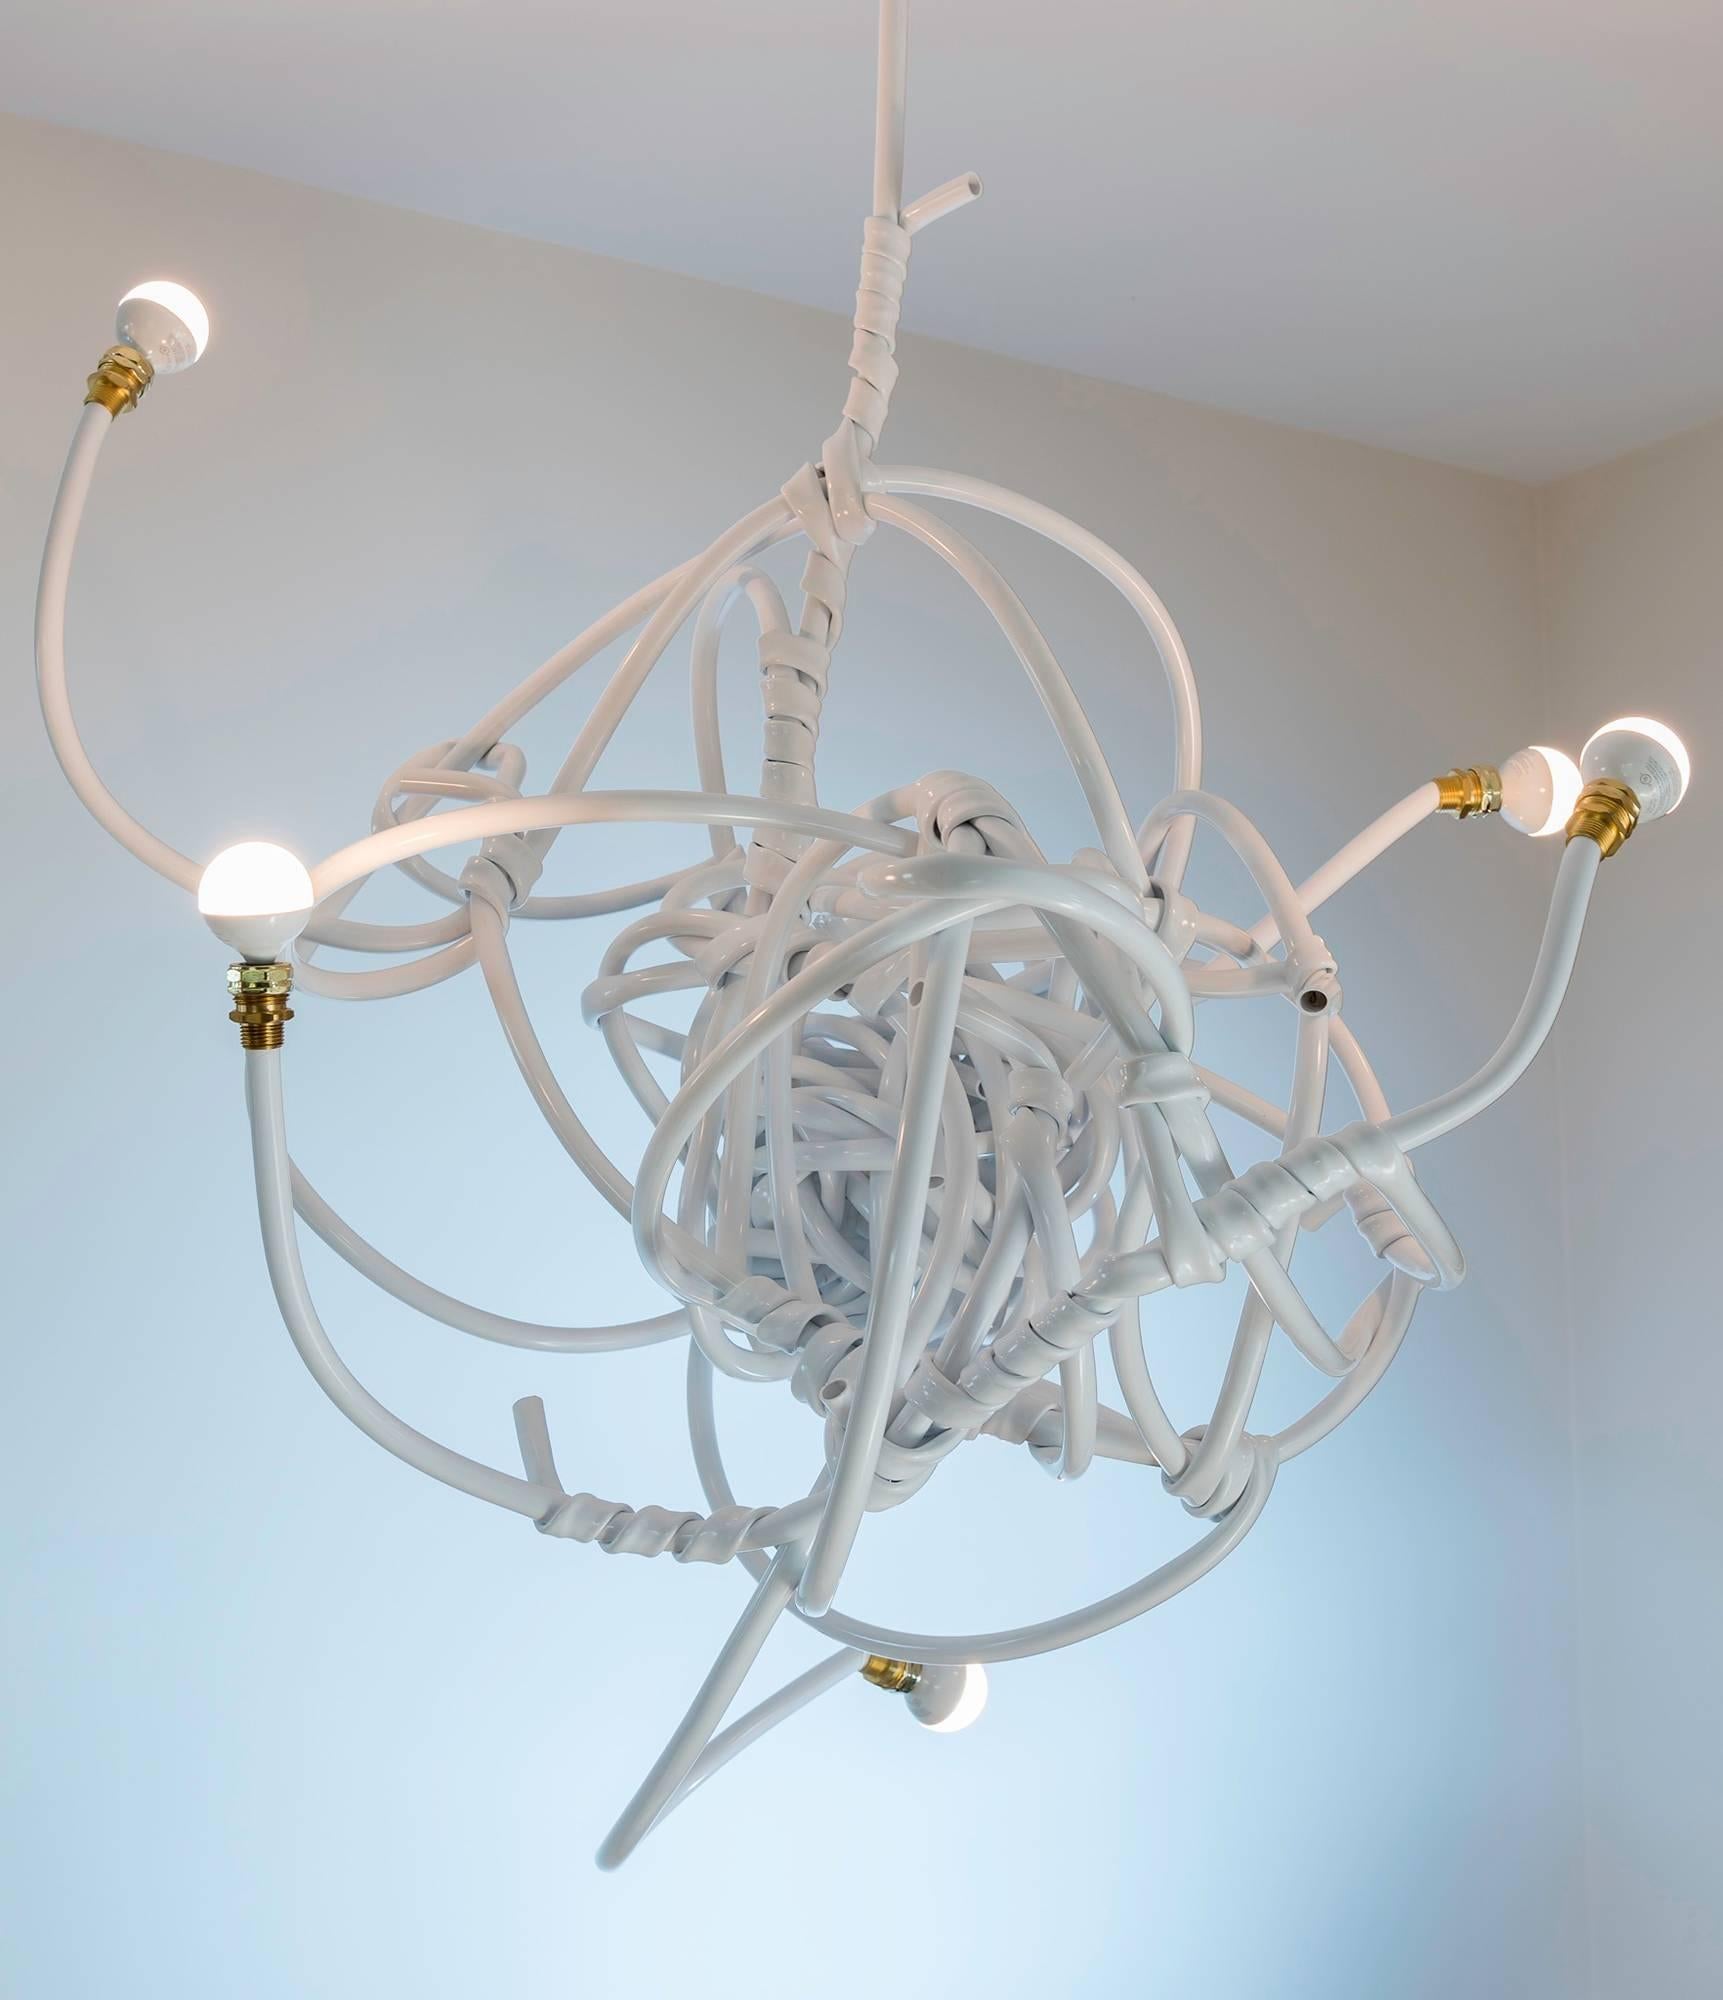 Contemporary and playful chandelier style lighting design created from vinyl hose to add subtle wit and a sculptural ambiance to your interiors. Easily installs directly into standard ceiling fixtures and uses 40w incandescent or 60w LED bulbs. This